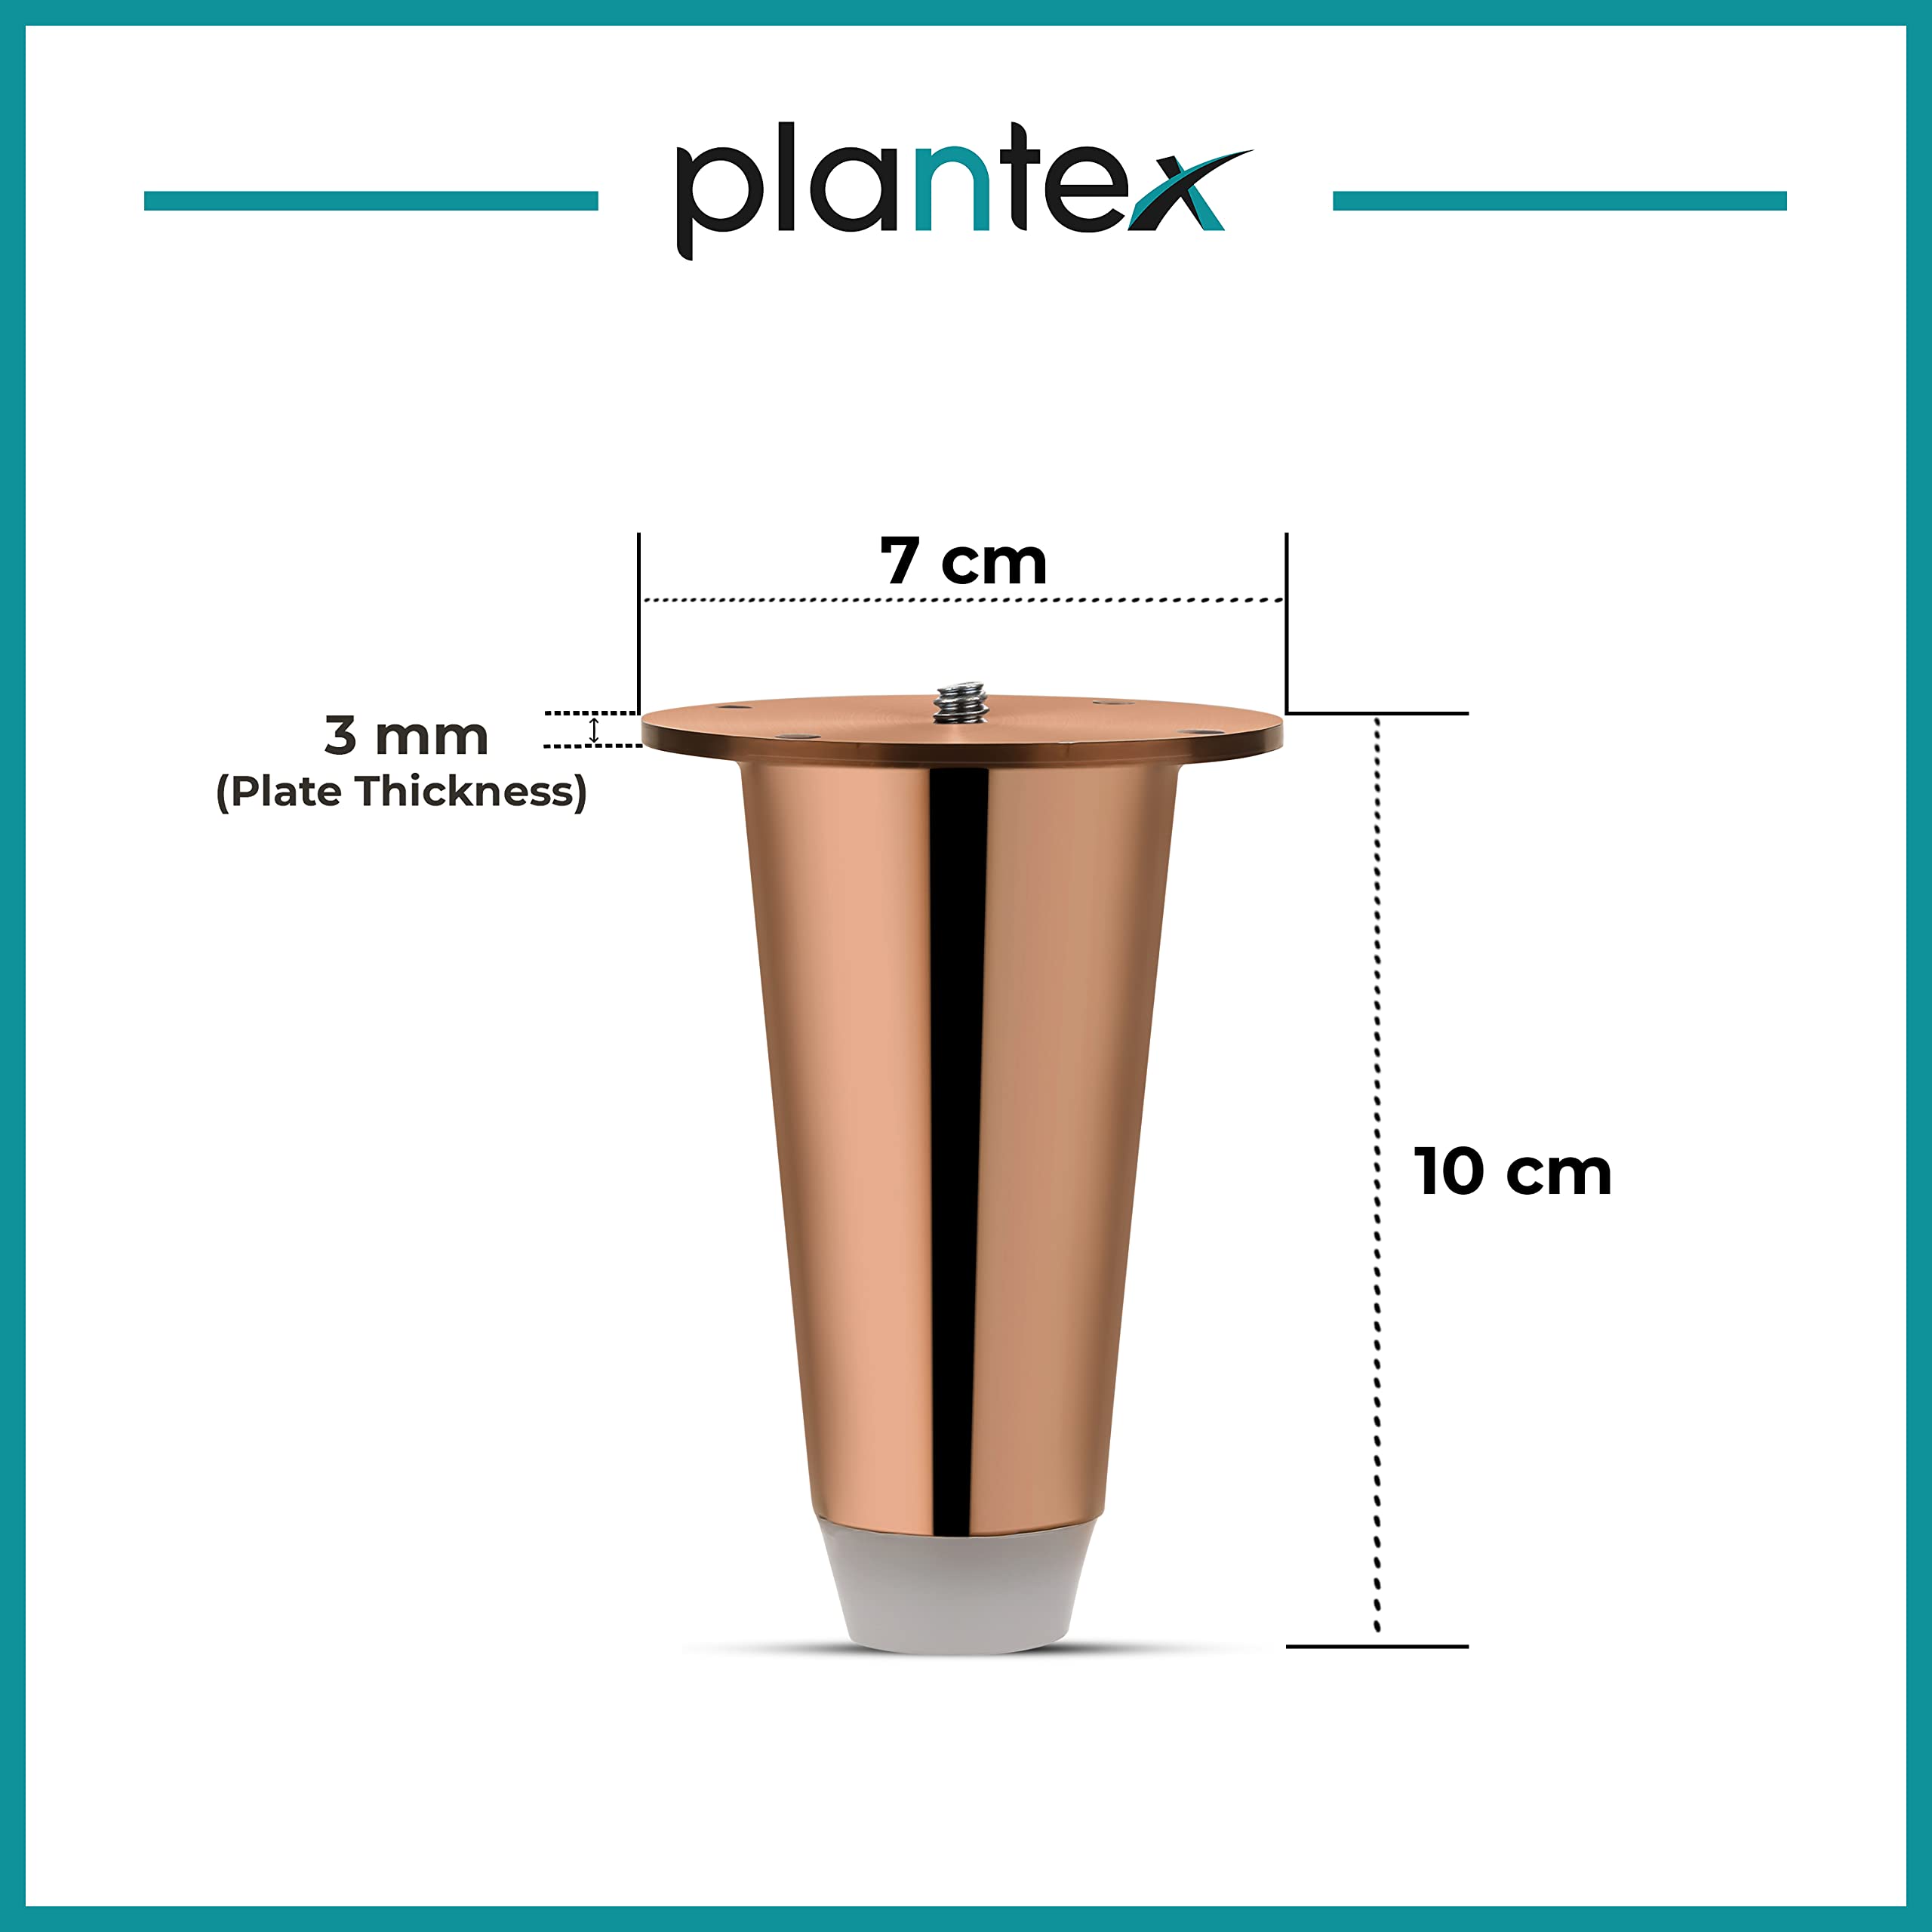 Plantex Heavy Duty Stainless Steel 4 inch Sofa Leg/Bed Furniture Leg Pair for Home Furnitures (DTS-53, Rose Gold) – 6 pcs